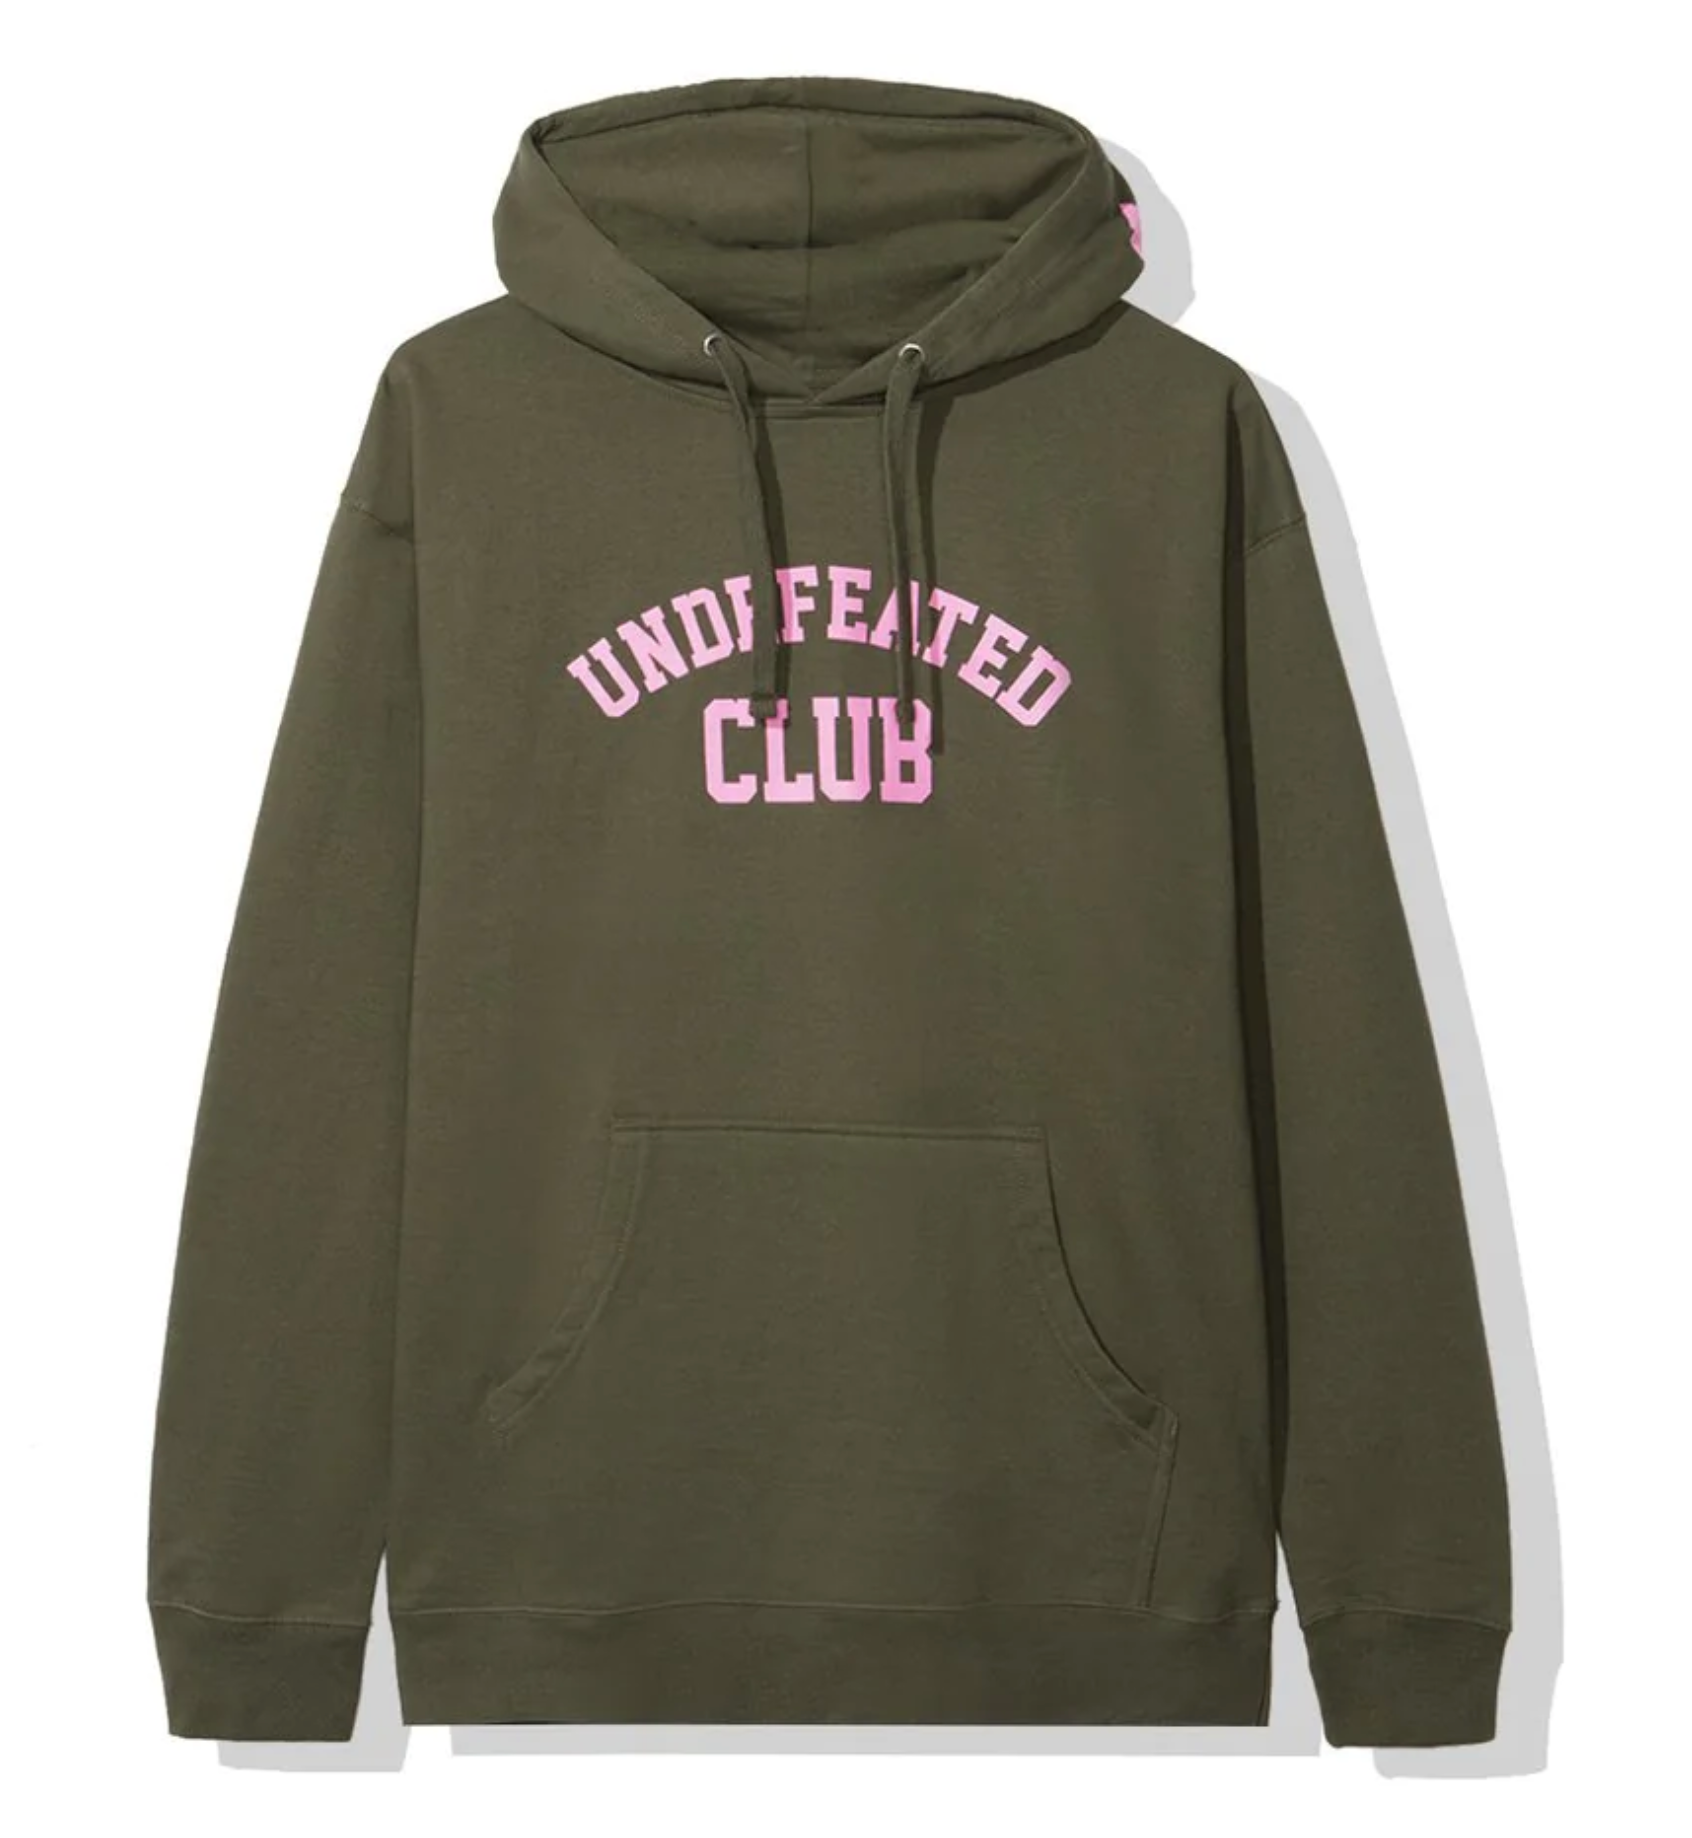 ASSC X "Undefeated Club" Hoodie 'Olive'